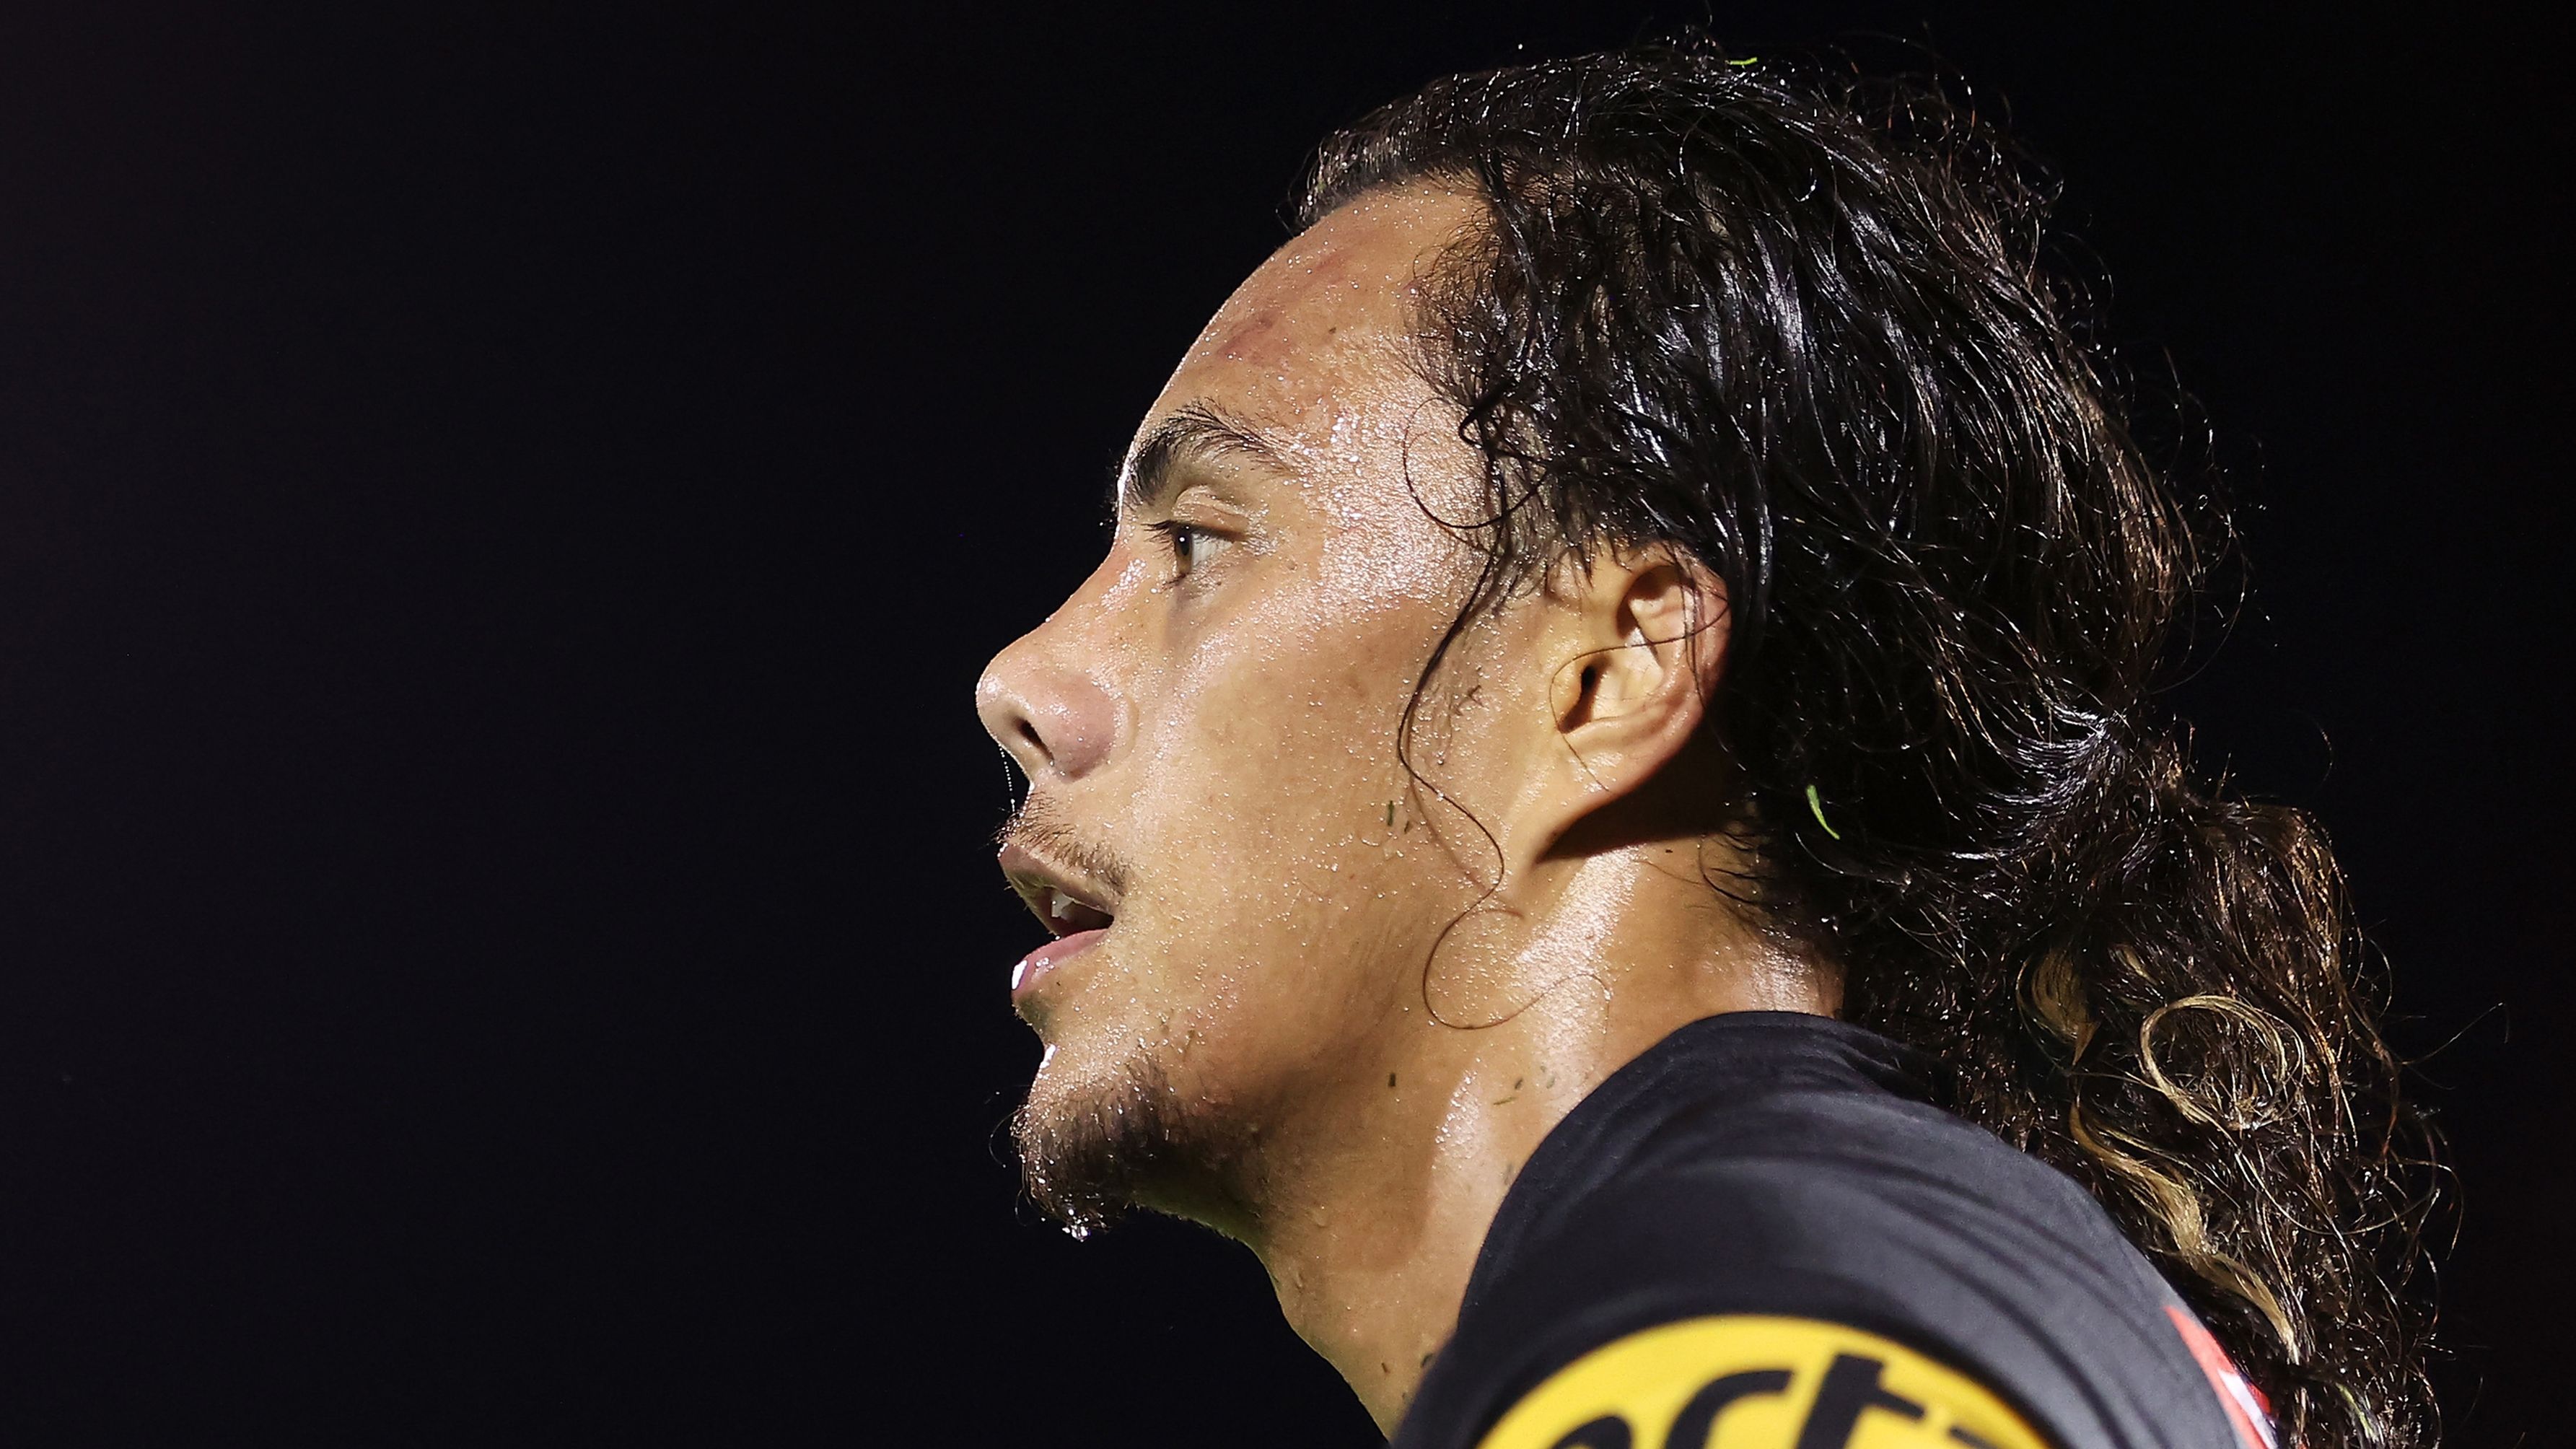 PENRITH, AUSTRALIA - MARCH 03: Jarome Luai of the Panthers watches on during the round NRL match between the Penrith Panthers and the Brisbane Broncos at BlueBet Stadium on March 03, 2023 in Penrith, Australia. (Photo by Mark Kolbe/Getty Images)